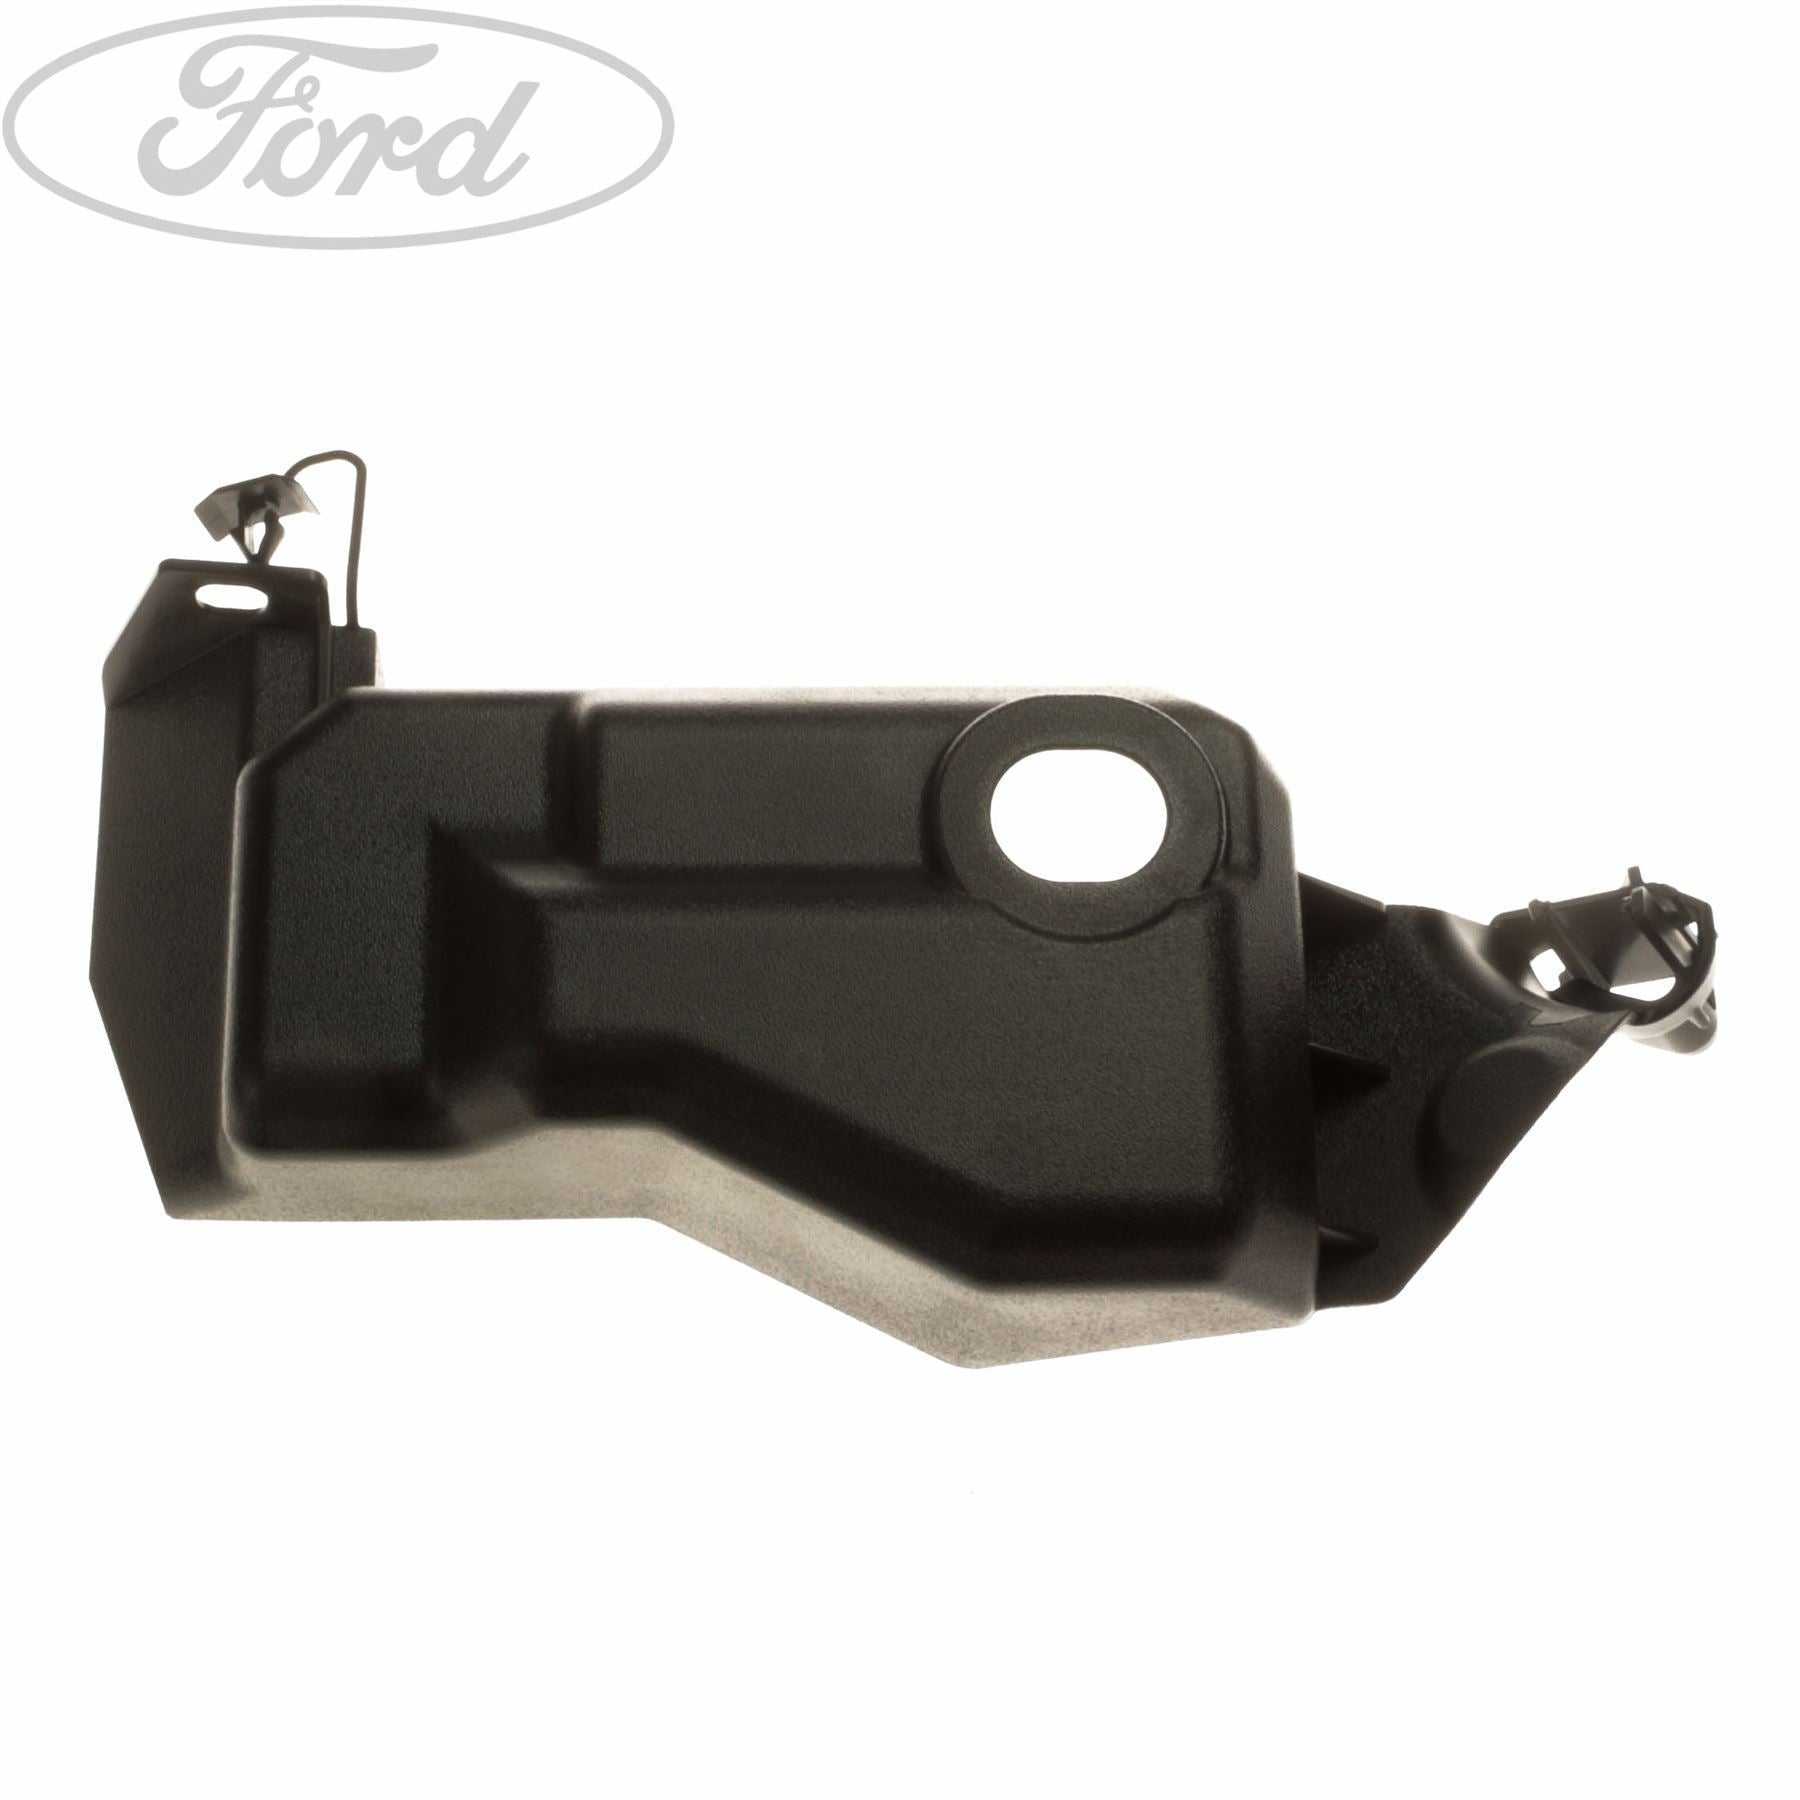 Ford, TRANSIT WIRING COVER CONNECTOR